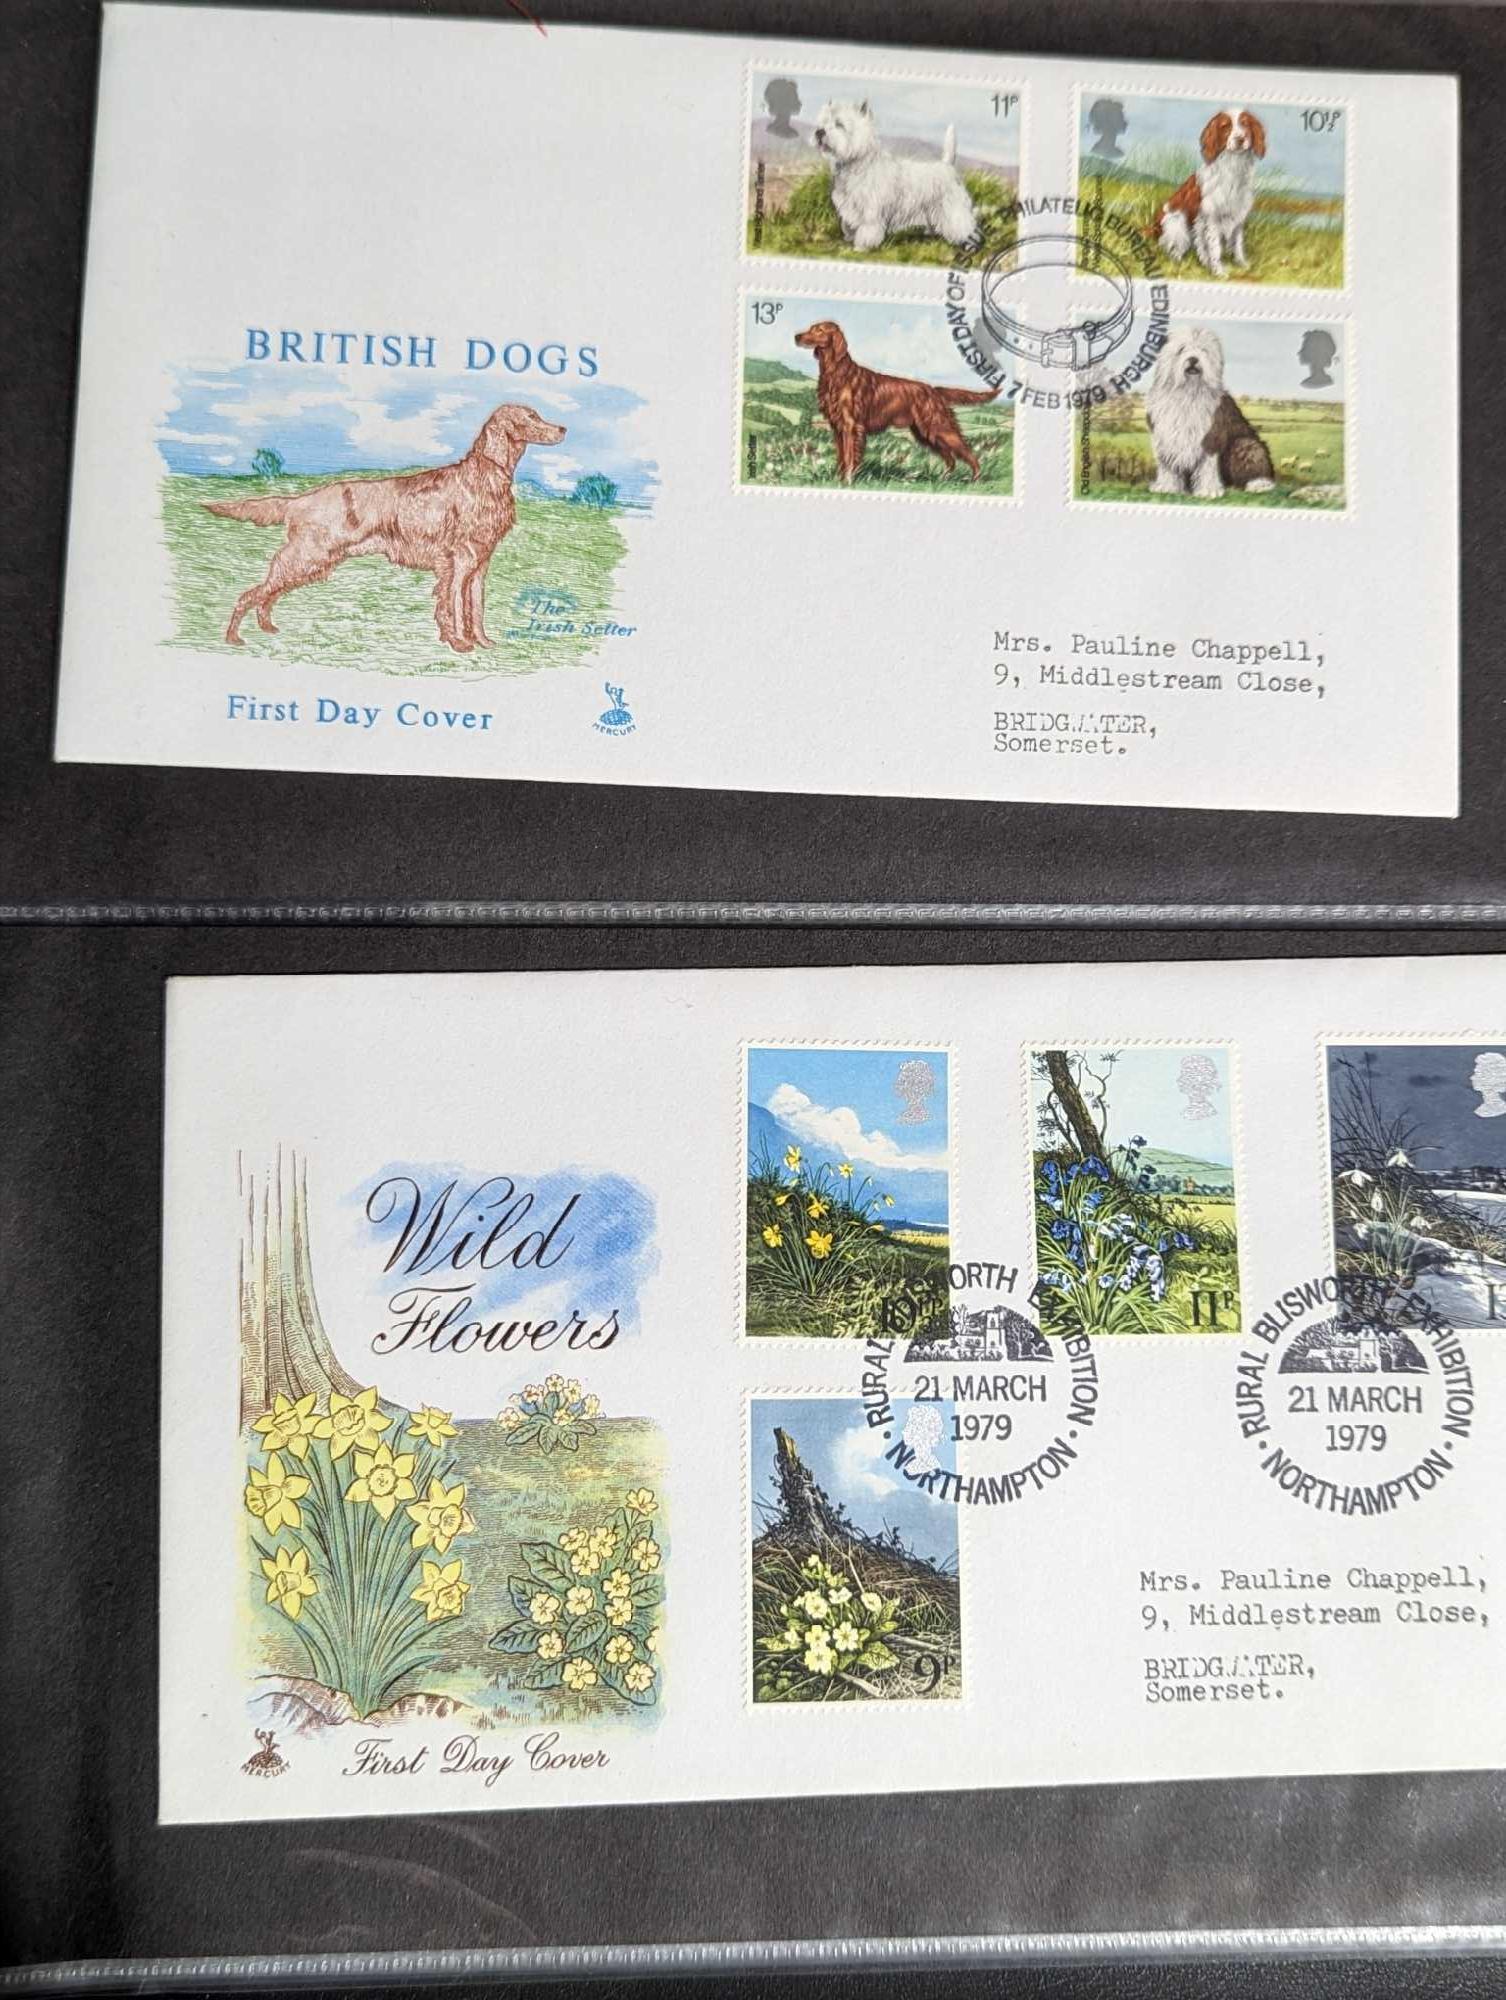 POSTAGE STAMPS - Commemorative First Day Covers c. - Image 12 of 17